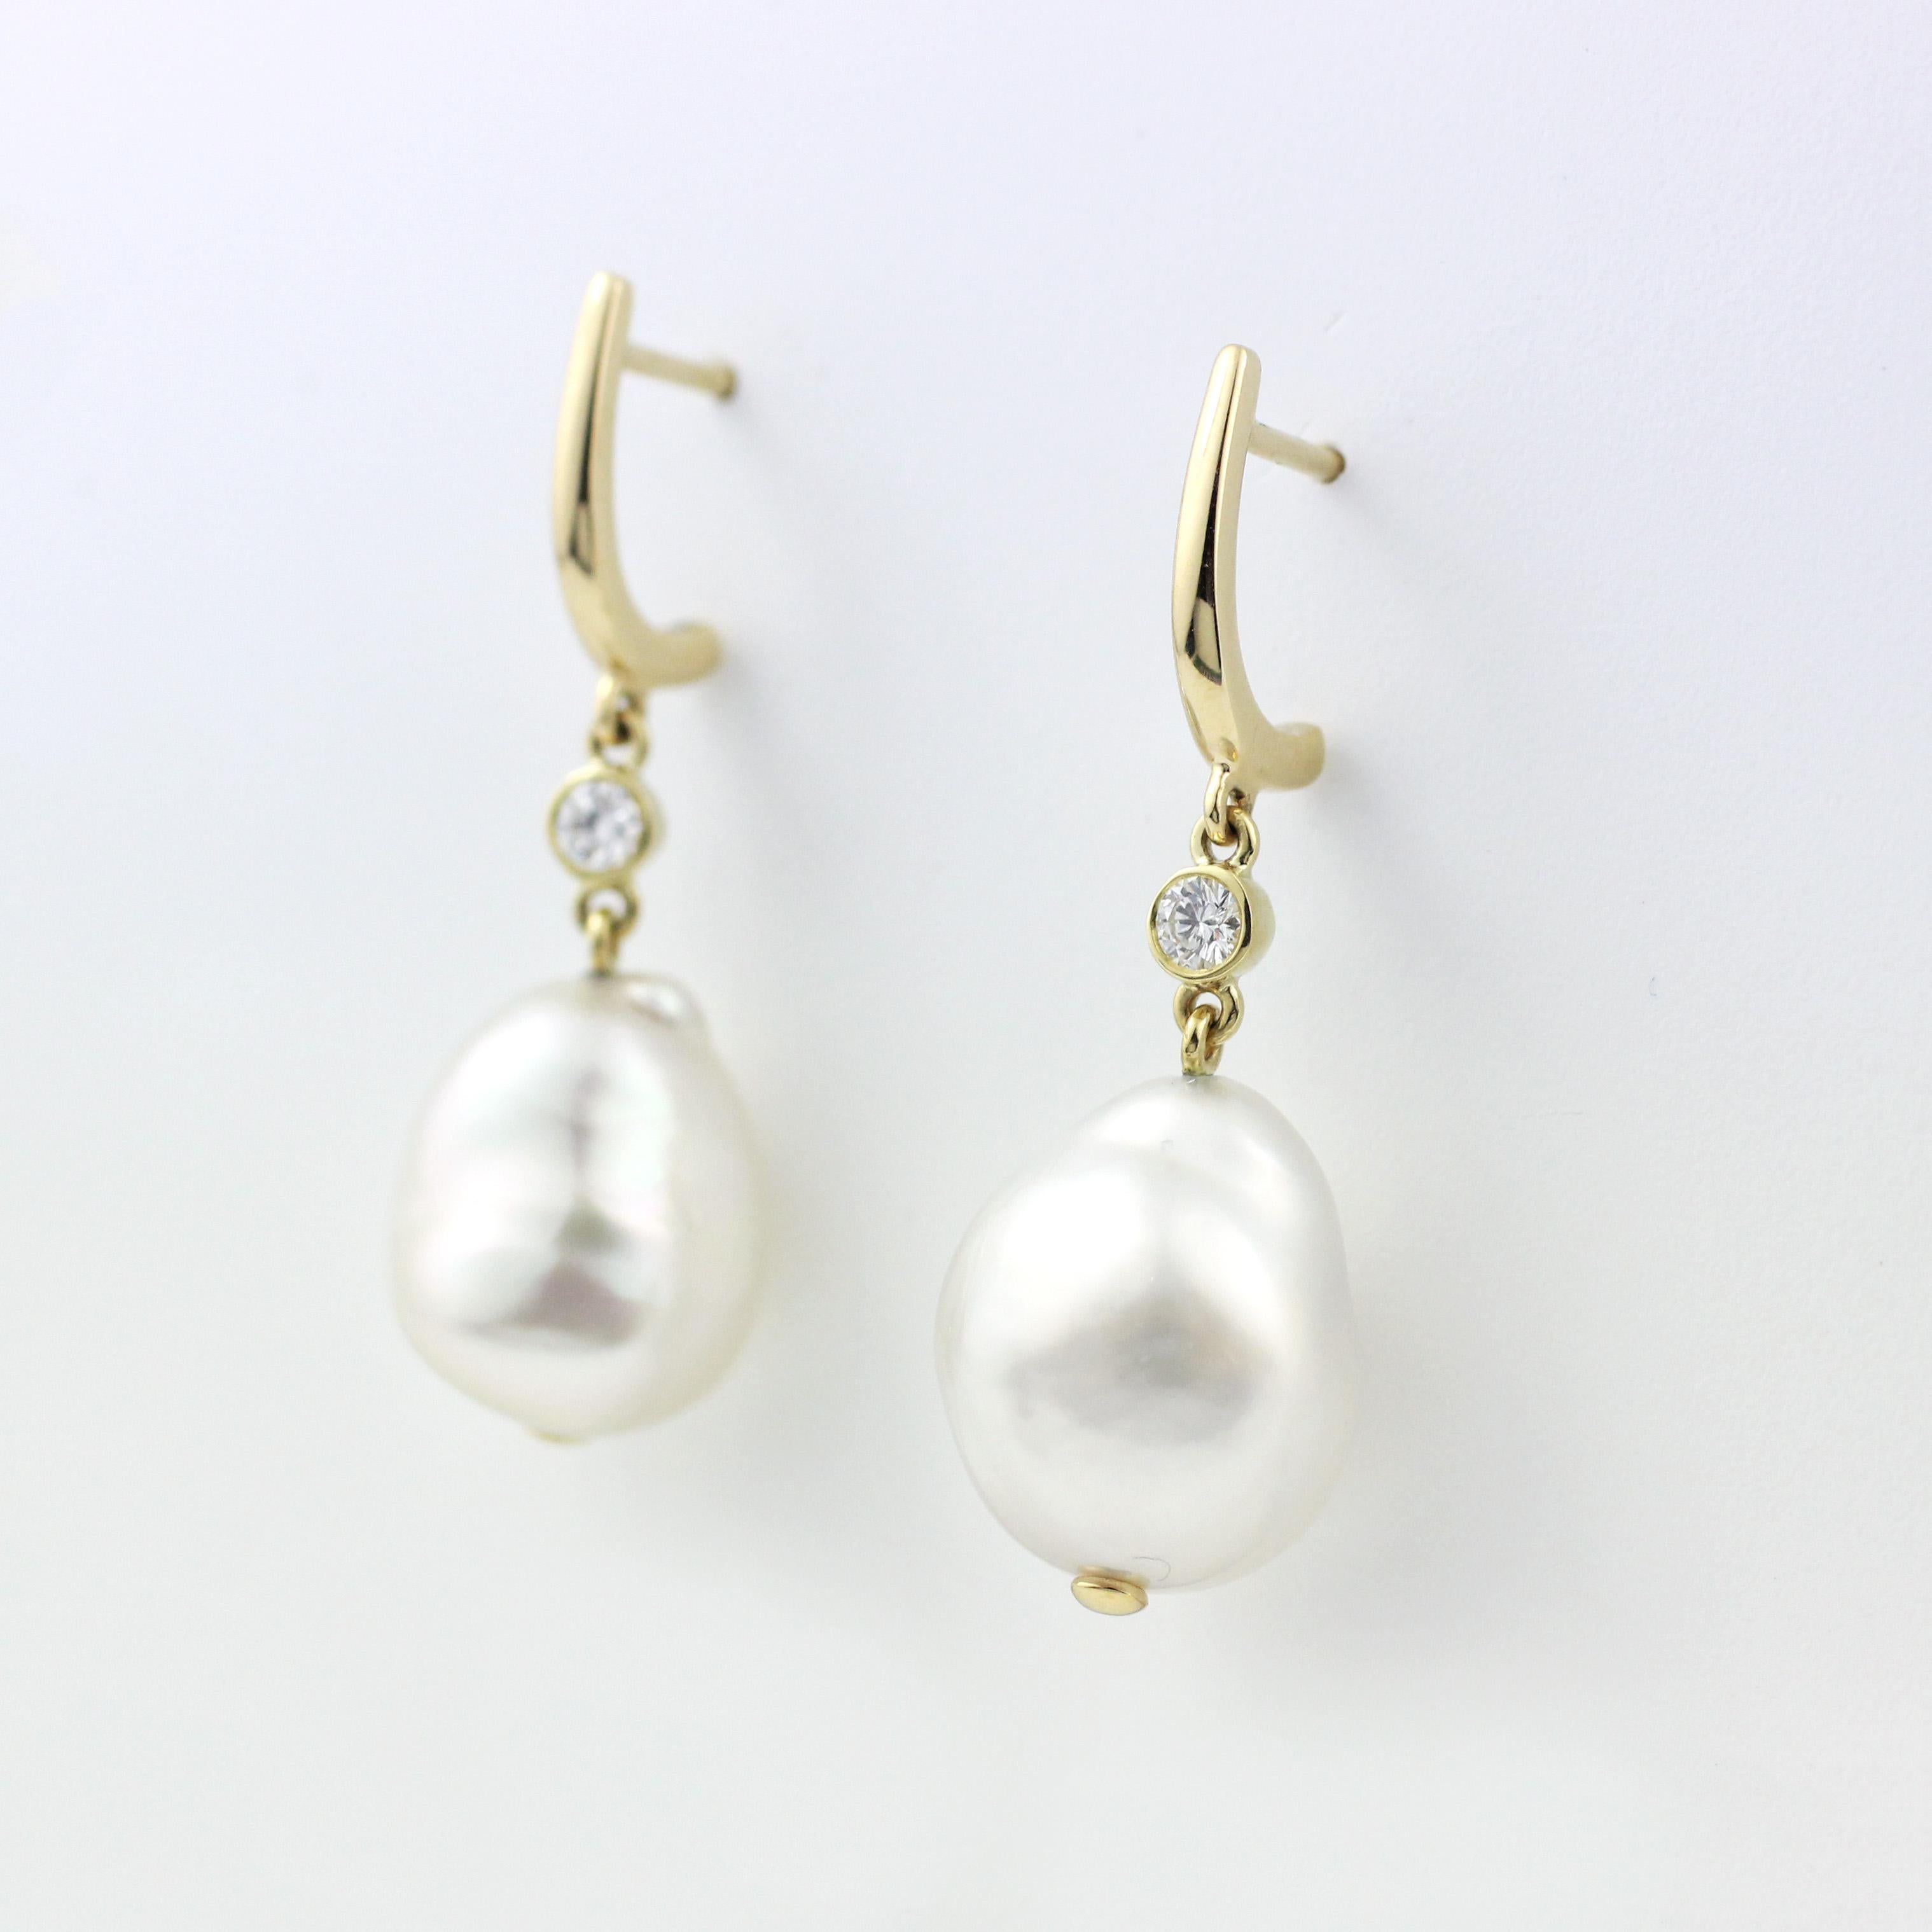 A beautiful pair of 18 Kt Gold, Freshwater Baroque Pearl and Diamond Earrings.  

The large Baroque Pearls in these versatile drop earrings measure 11mm to 12mm.  Two bezel-set Diamonds add a little sparkle ( .10 total carat weight).  18 Kt Gold